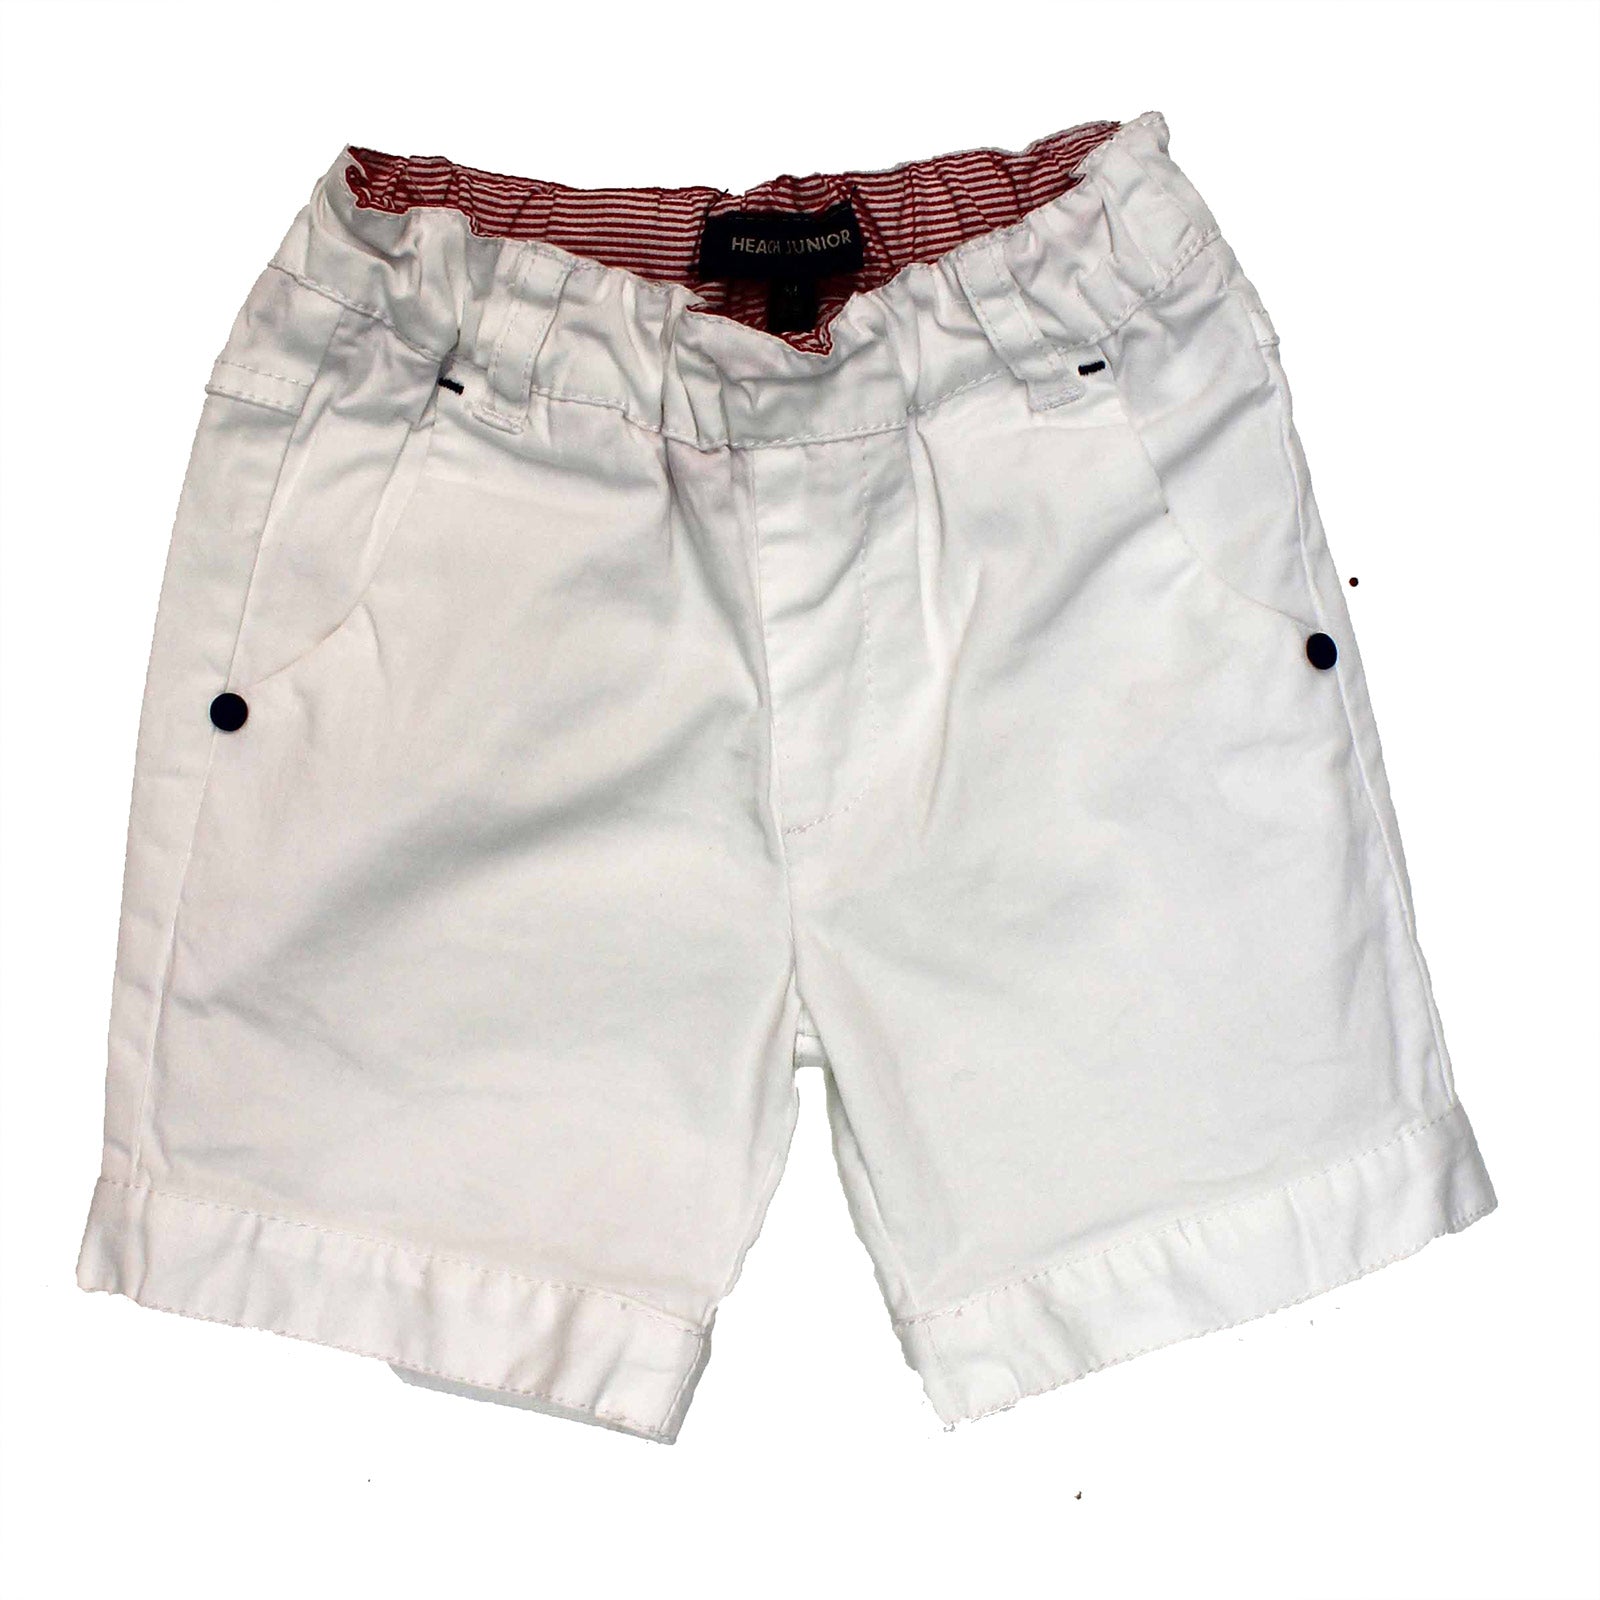 
  Bermuda shorts from the Silvian Heach children's clothing line with pockets on the front and b...